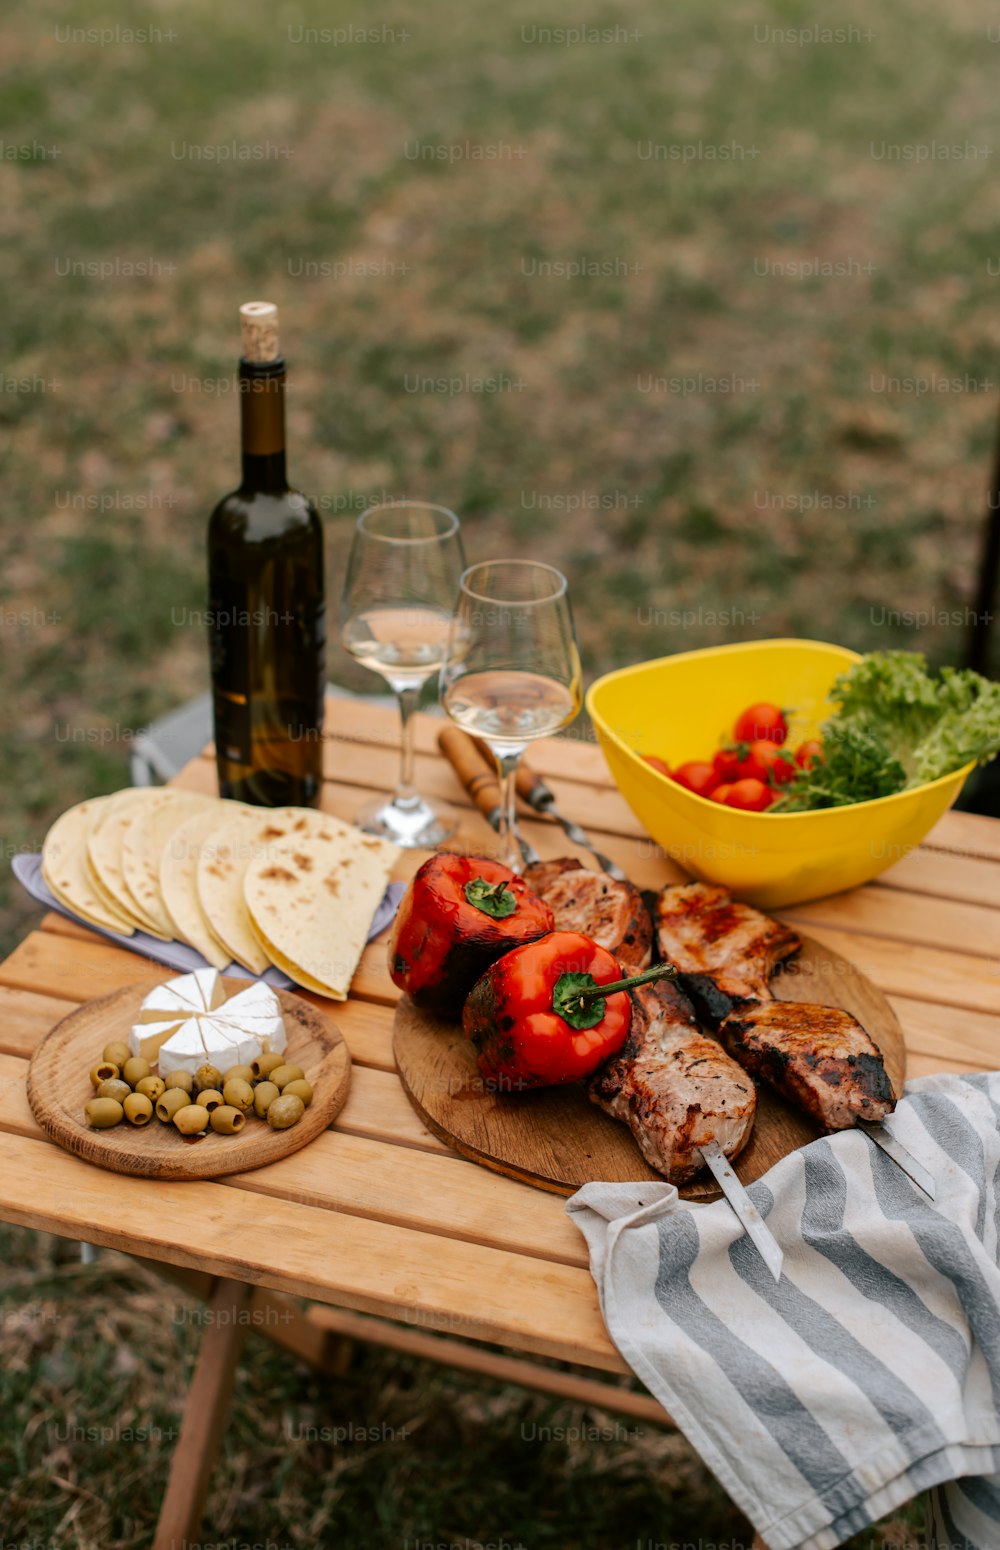 a wooden table topped with a plate of food and wine